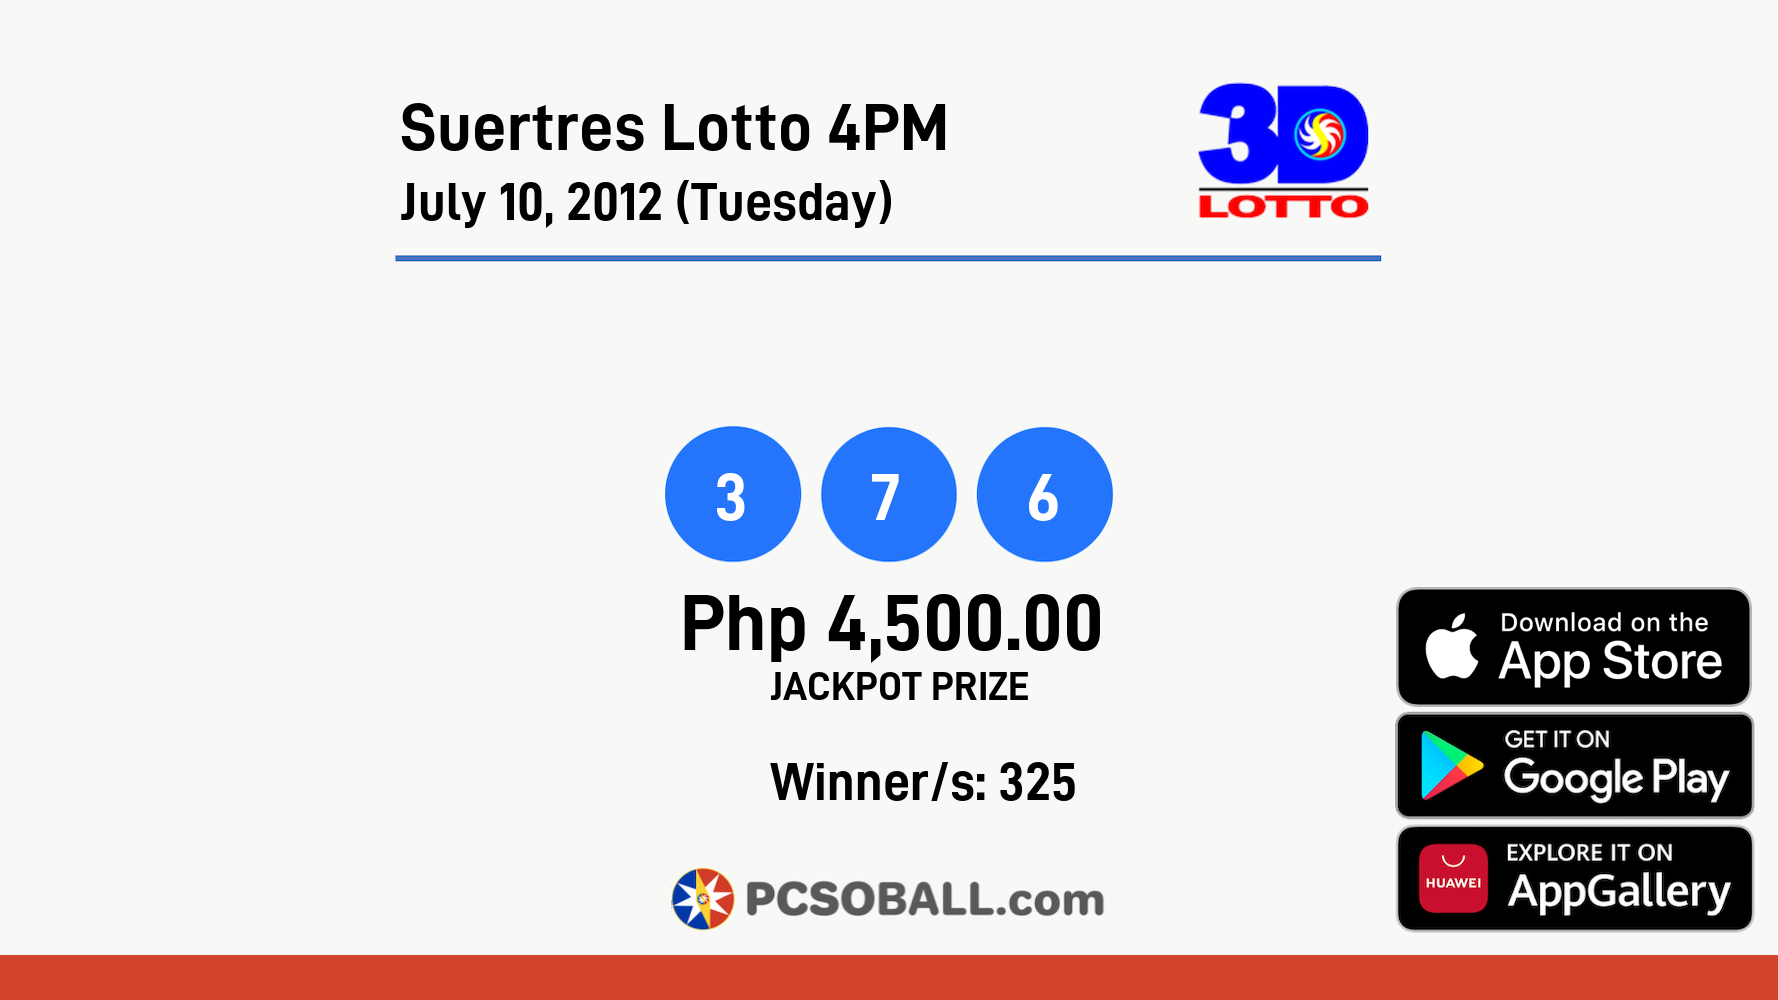 Suertres Lotto 4PM July 10, 2012 (Tuesday) Result